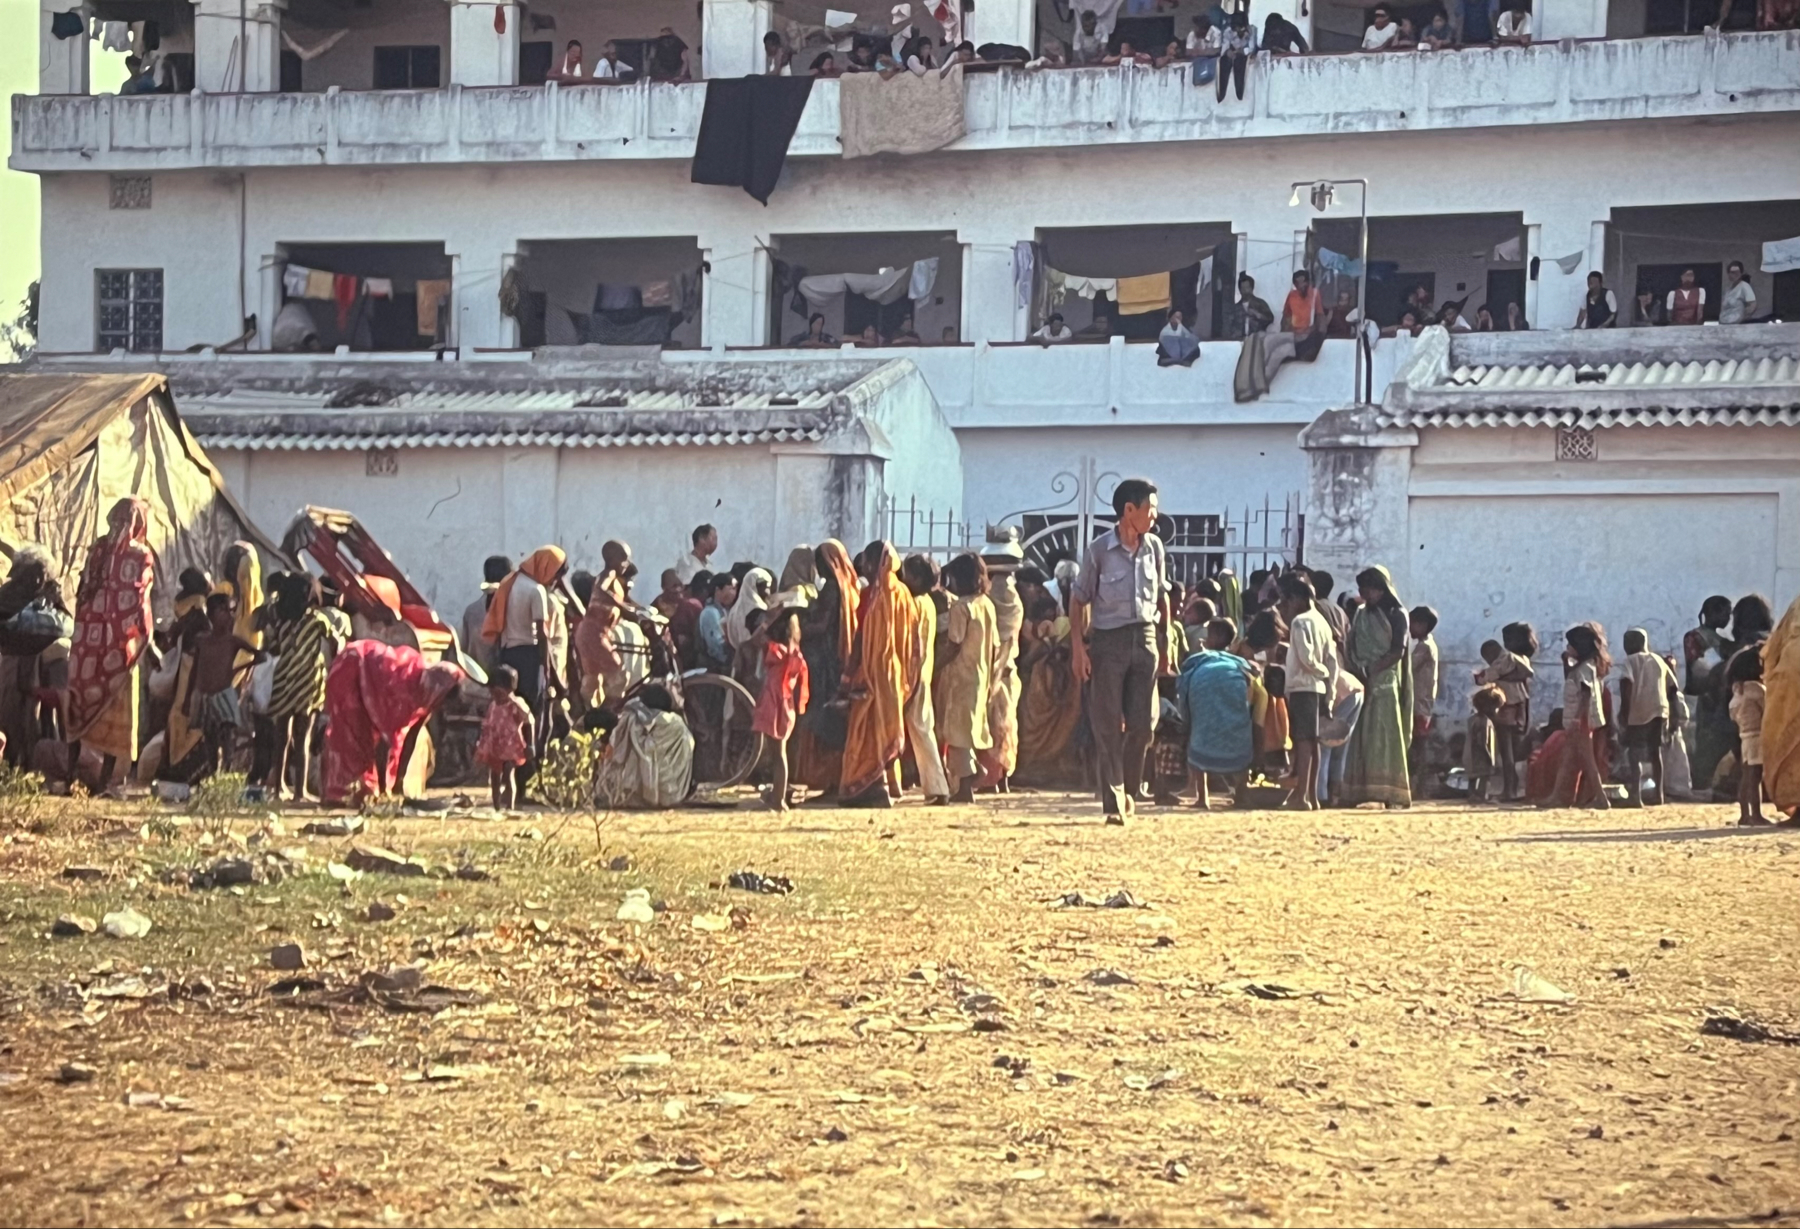 A crowd of people, many wearing traditional Indian clothing, gathered outside a white two-story building with balconies where more individuals are standing or sitting. Some are queuing toward a tent, suggesting a possible event or distribution taking place. The ground is dusty